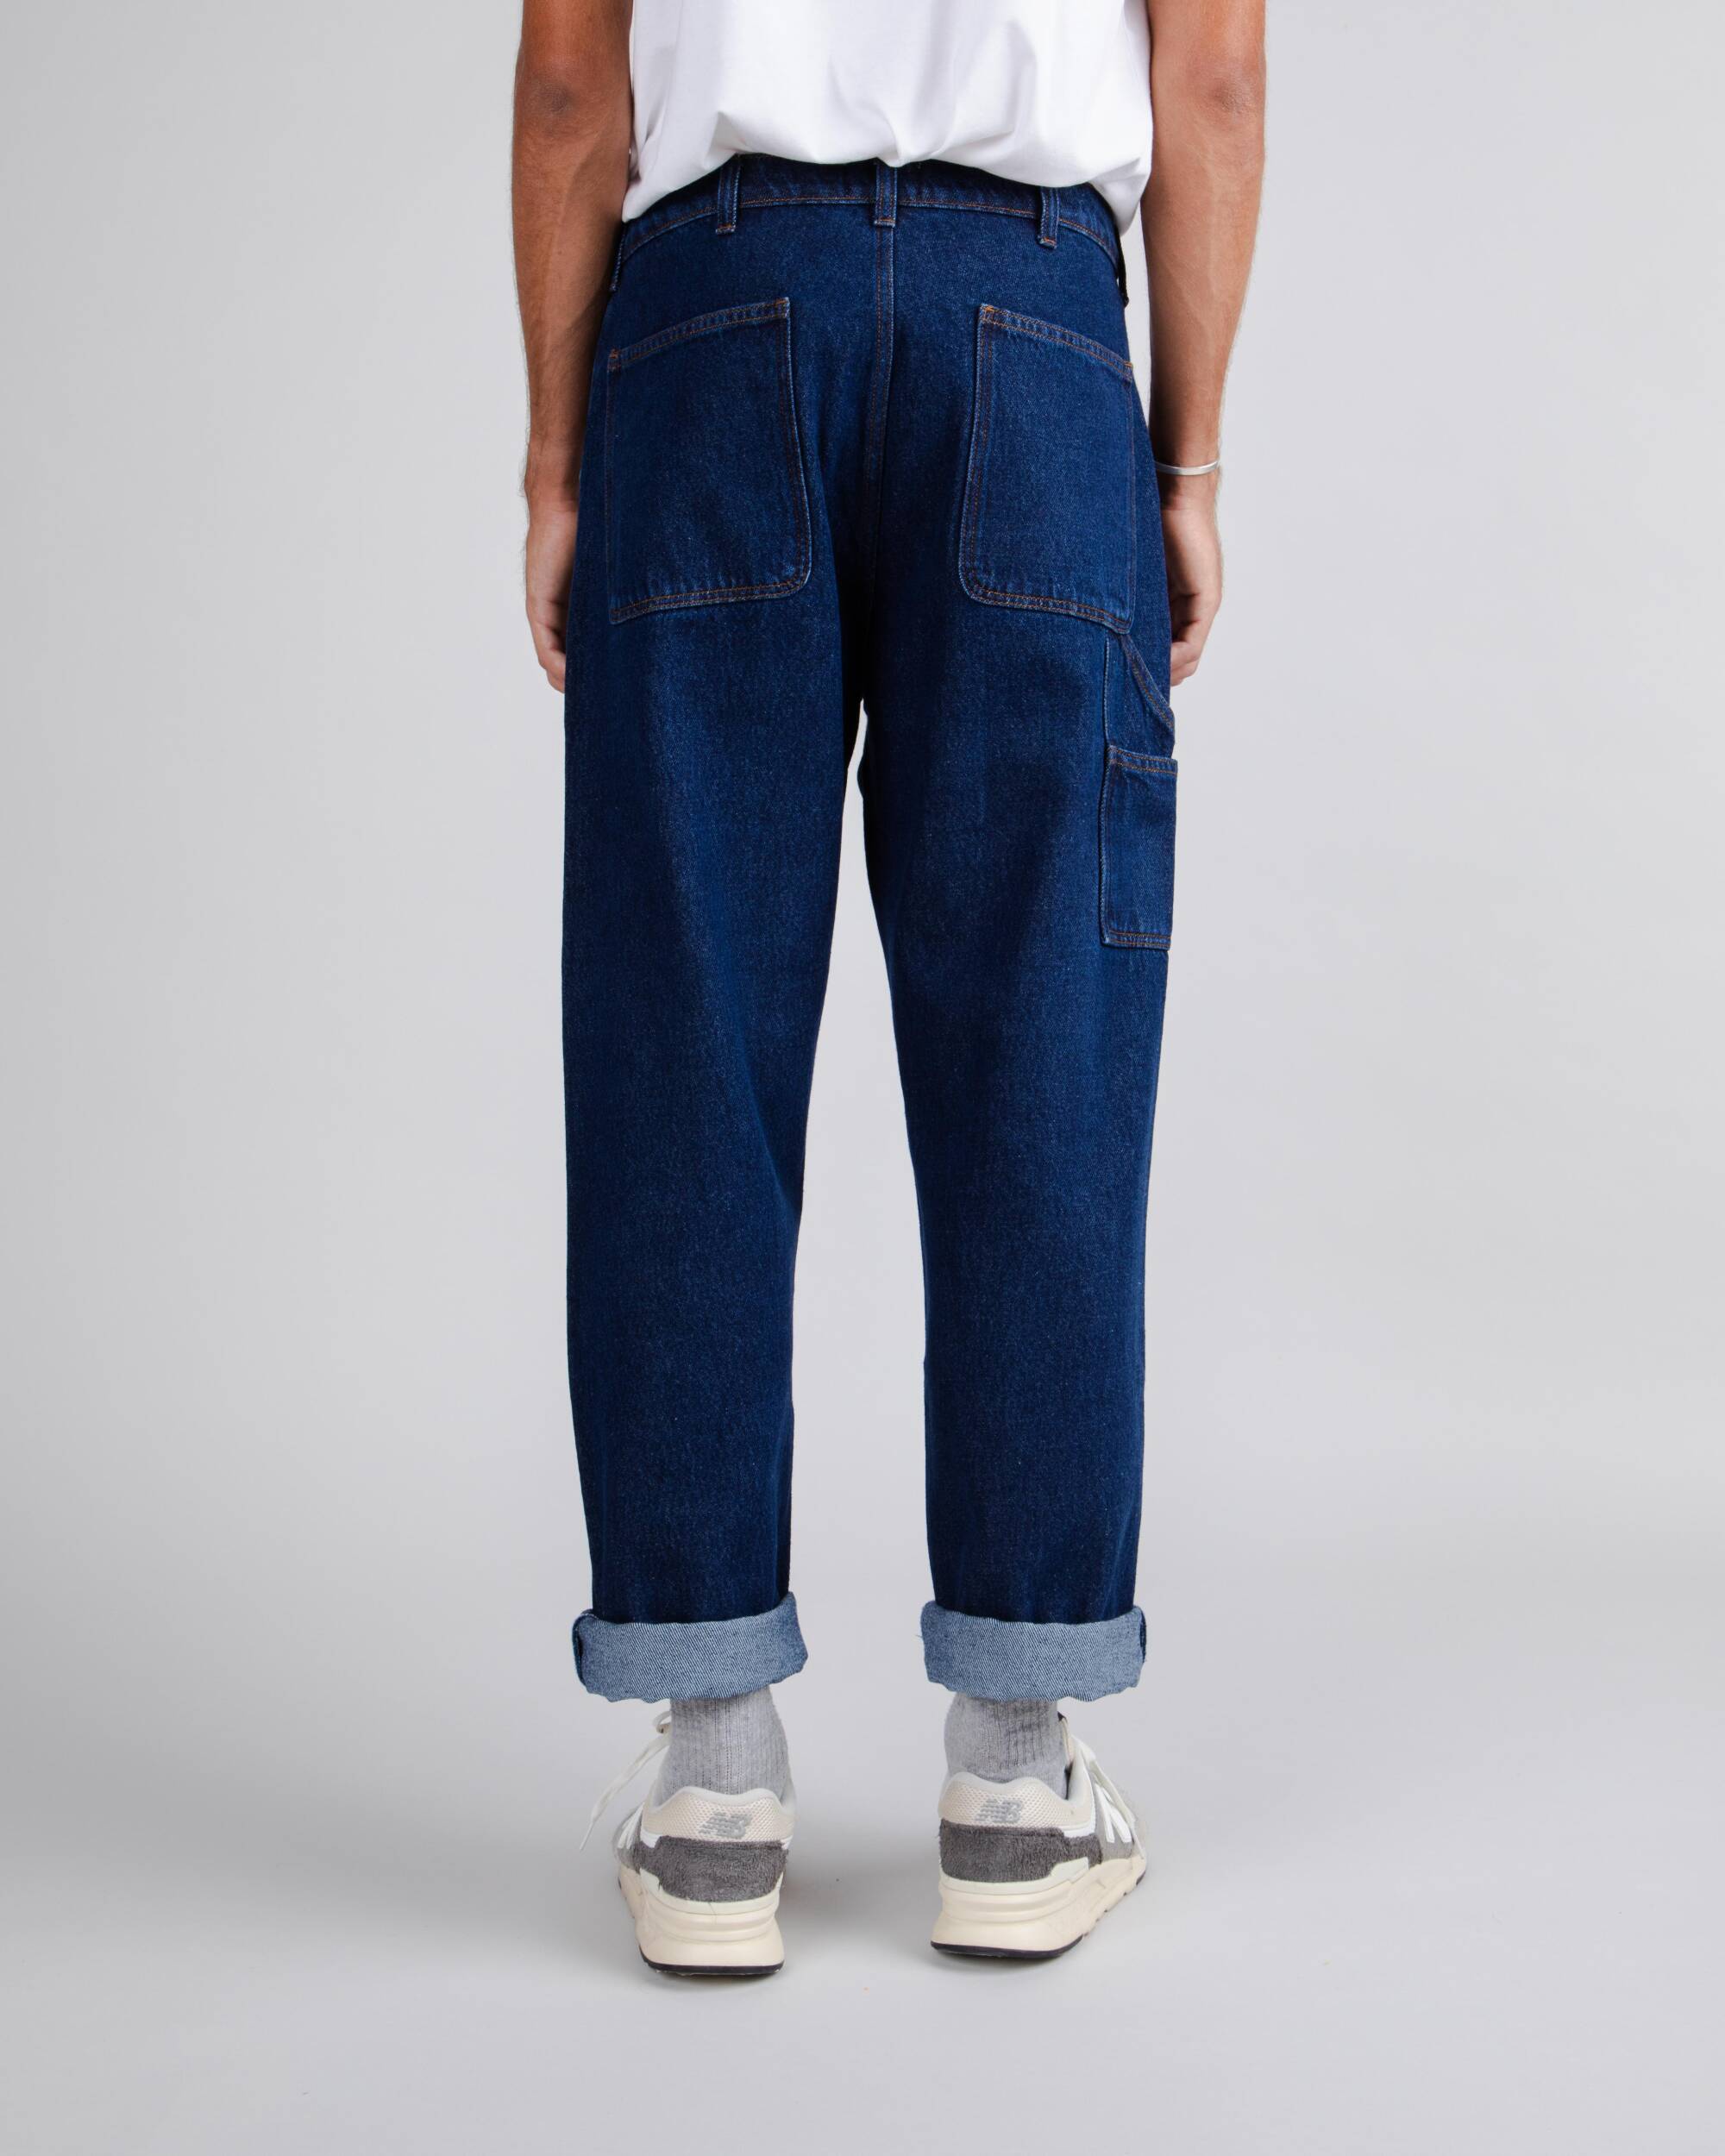 Blue workwear trousers made from organic cotton from Brava Fabrics